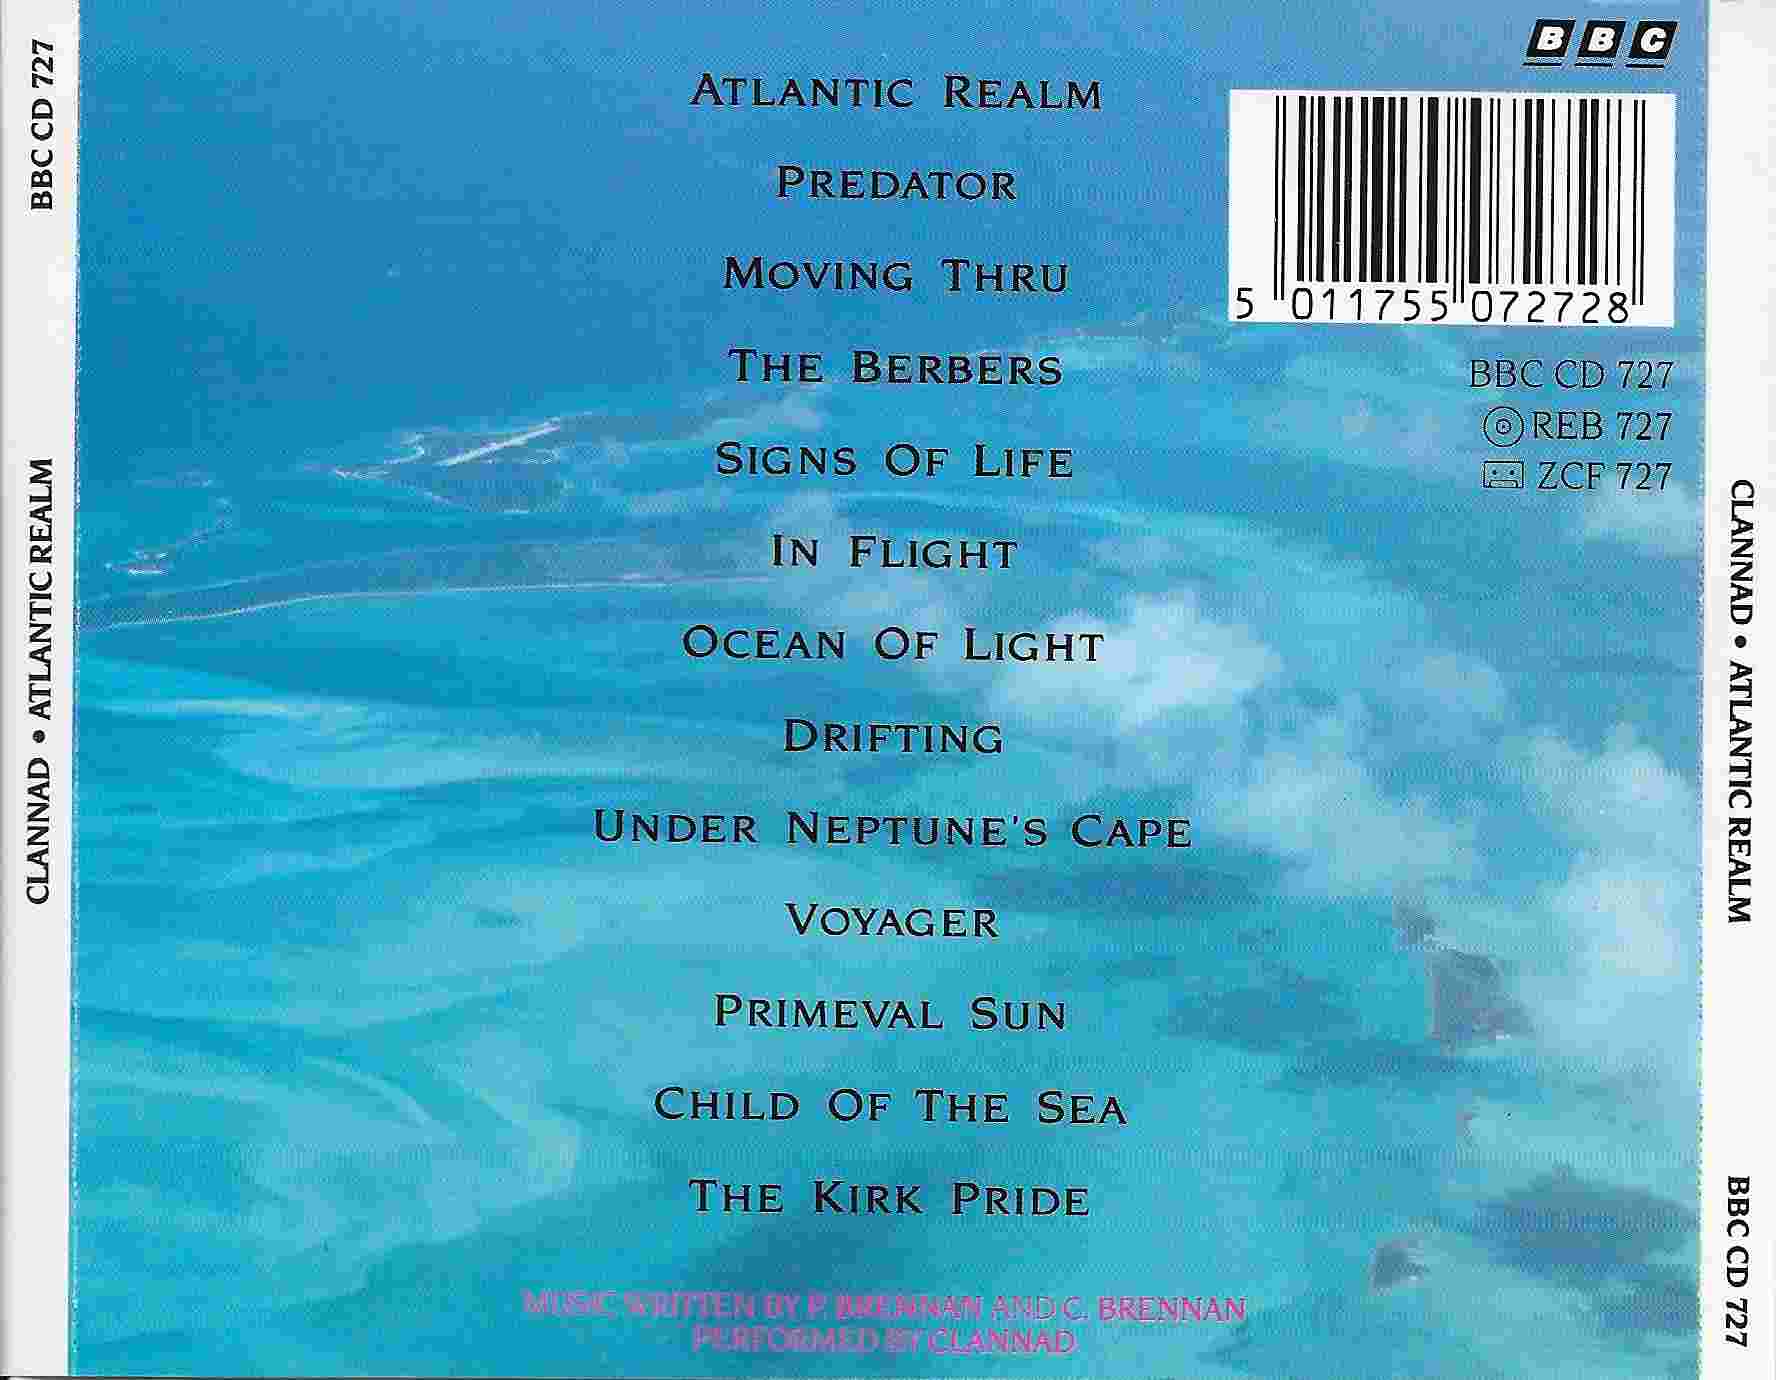 Picture of BBCCD727 Atlantic realm by artist Clannad from the BBC records and Tapes library